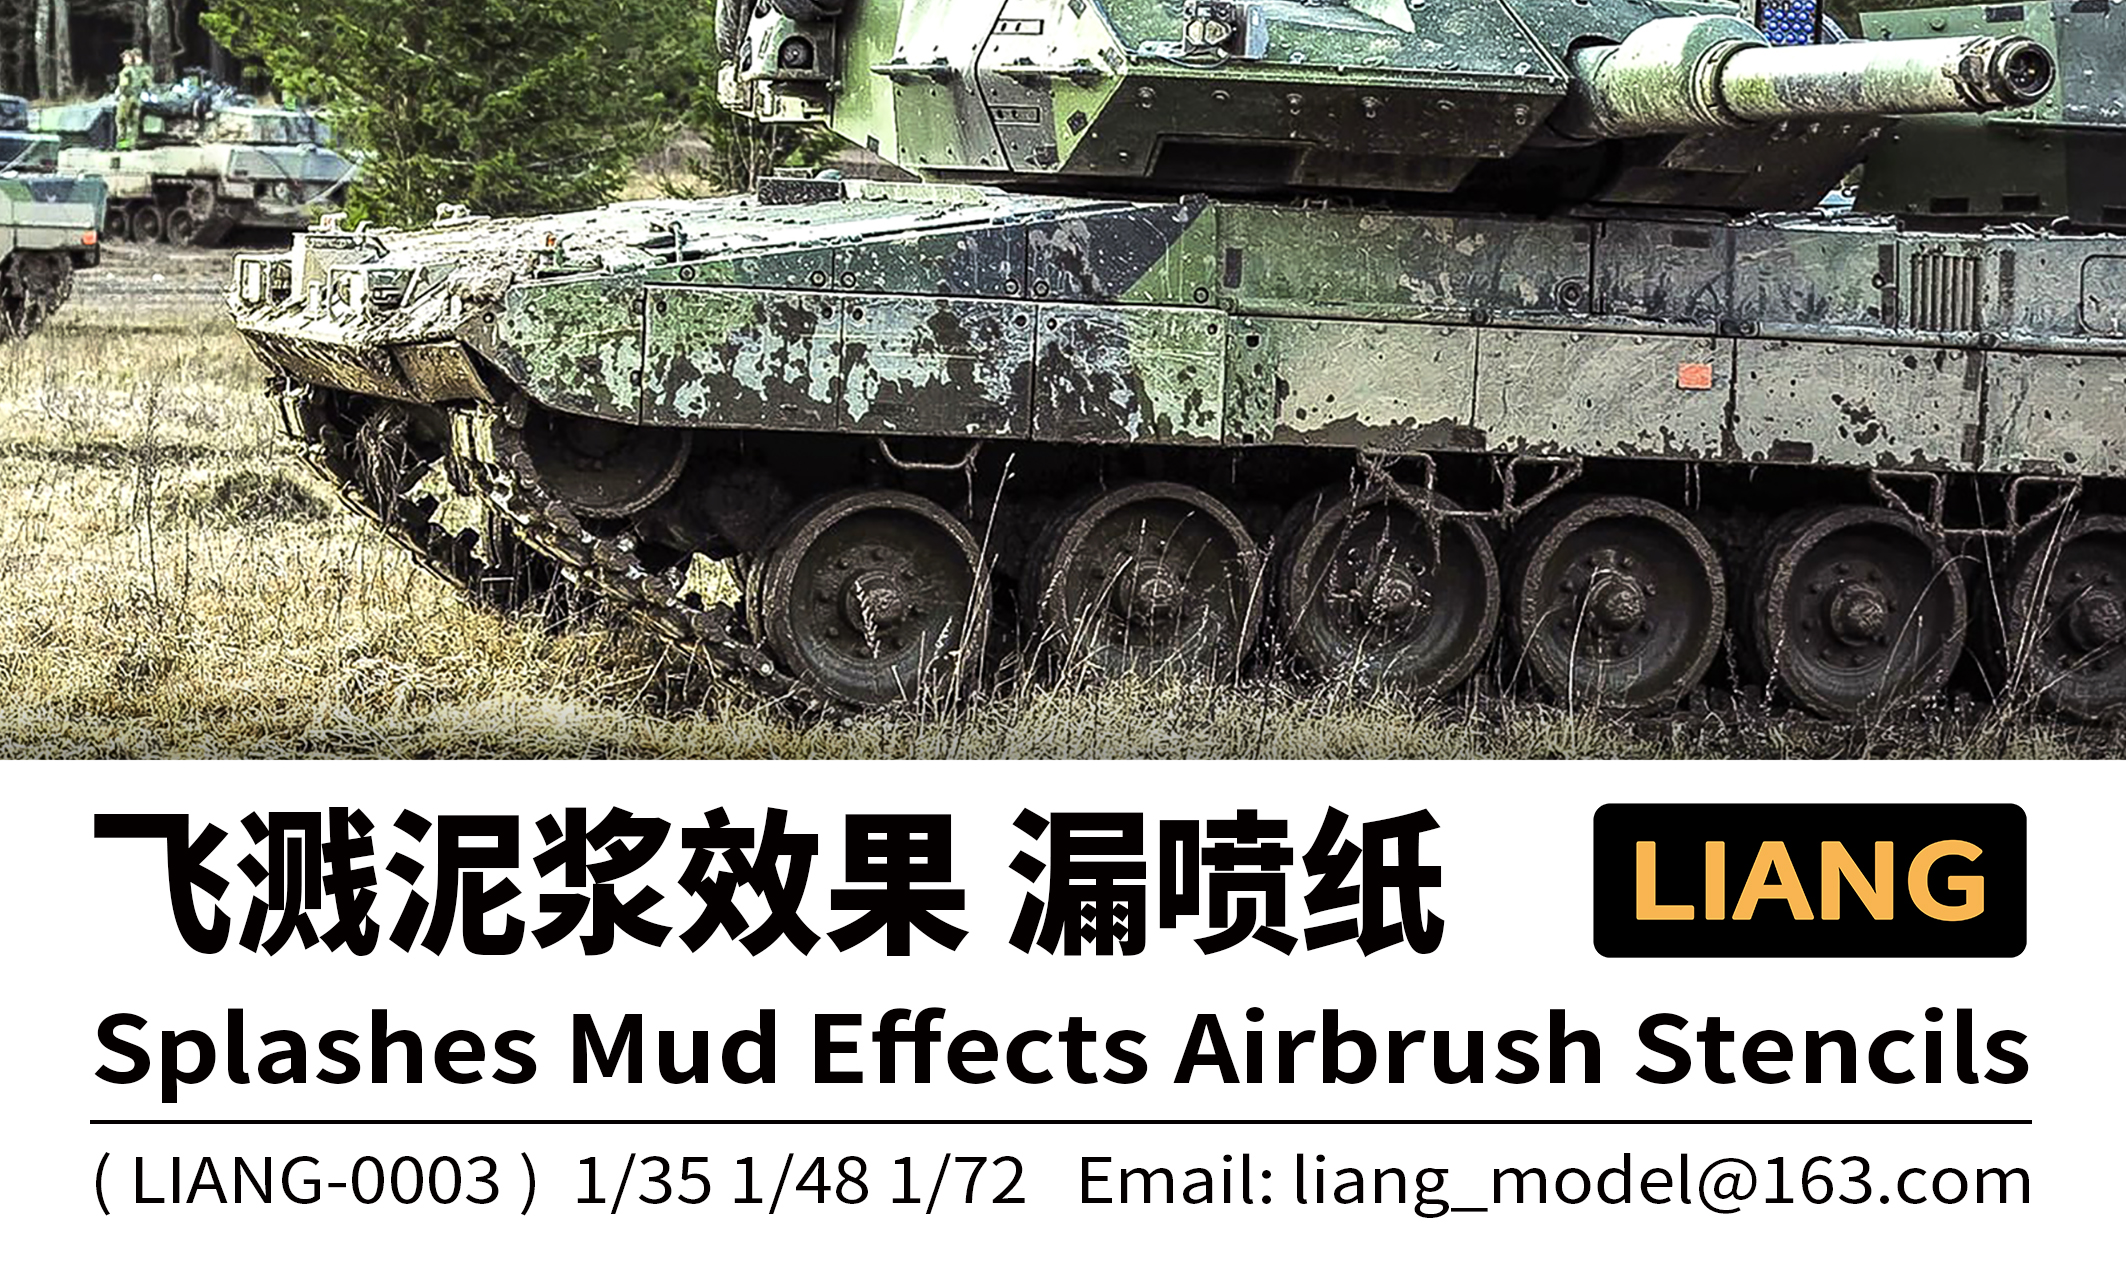 US$ 10.39 - LIANG-0008 Paint Crack Effects Airbrush Stencils Tool for 1/24  1/35 1/48 Scale Military Tank Model 